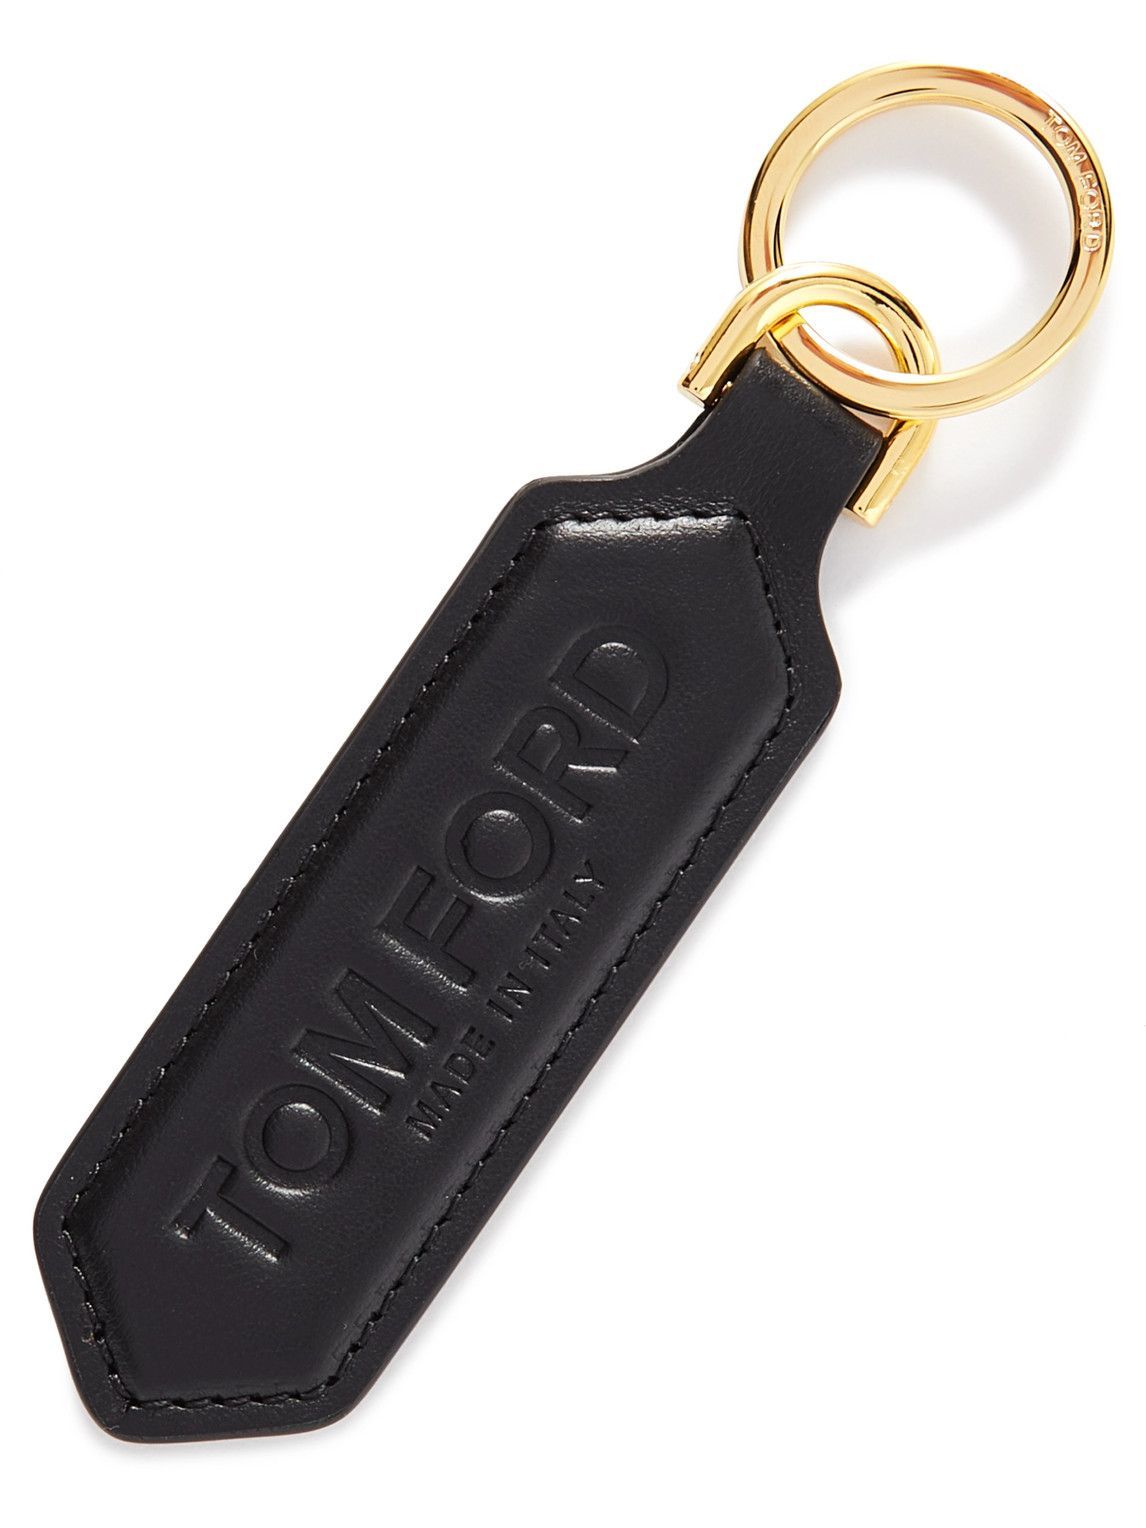 TOM FORD - Logo-Debossed Leather and Gold-Tone Key Fob TOM FORD